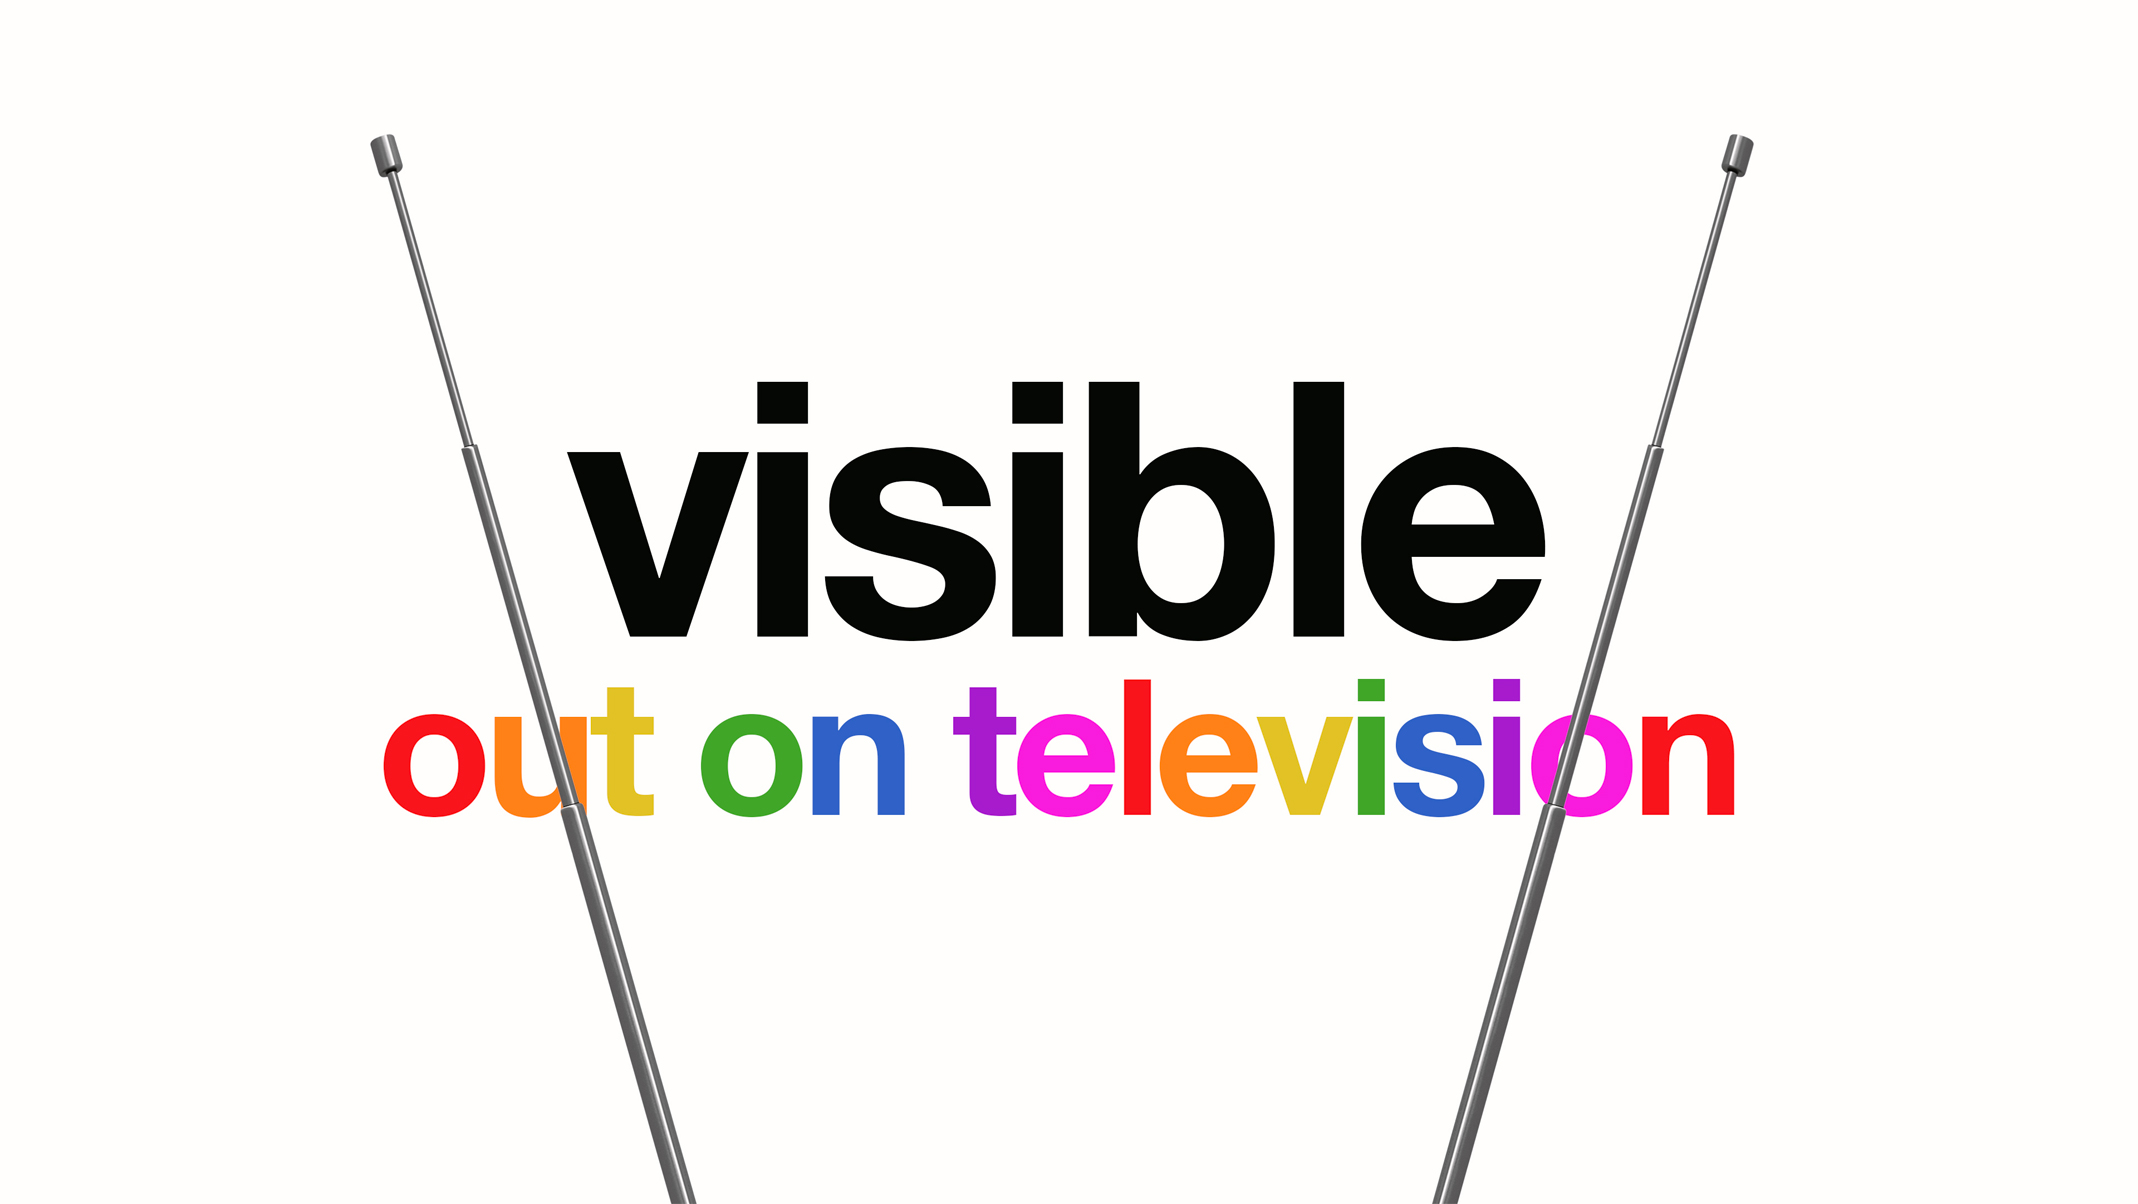 https://9to5mac.com/wp-content/uploads/sites/6/2019/12/Apple_TV_Visible_Out_on_Television_key_art_sh_cr.jpg.large_2x.jpg?quality=82&strip=all